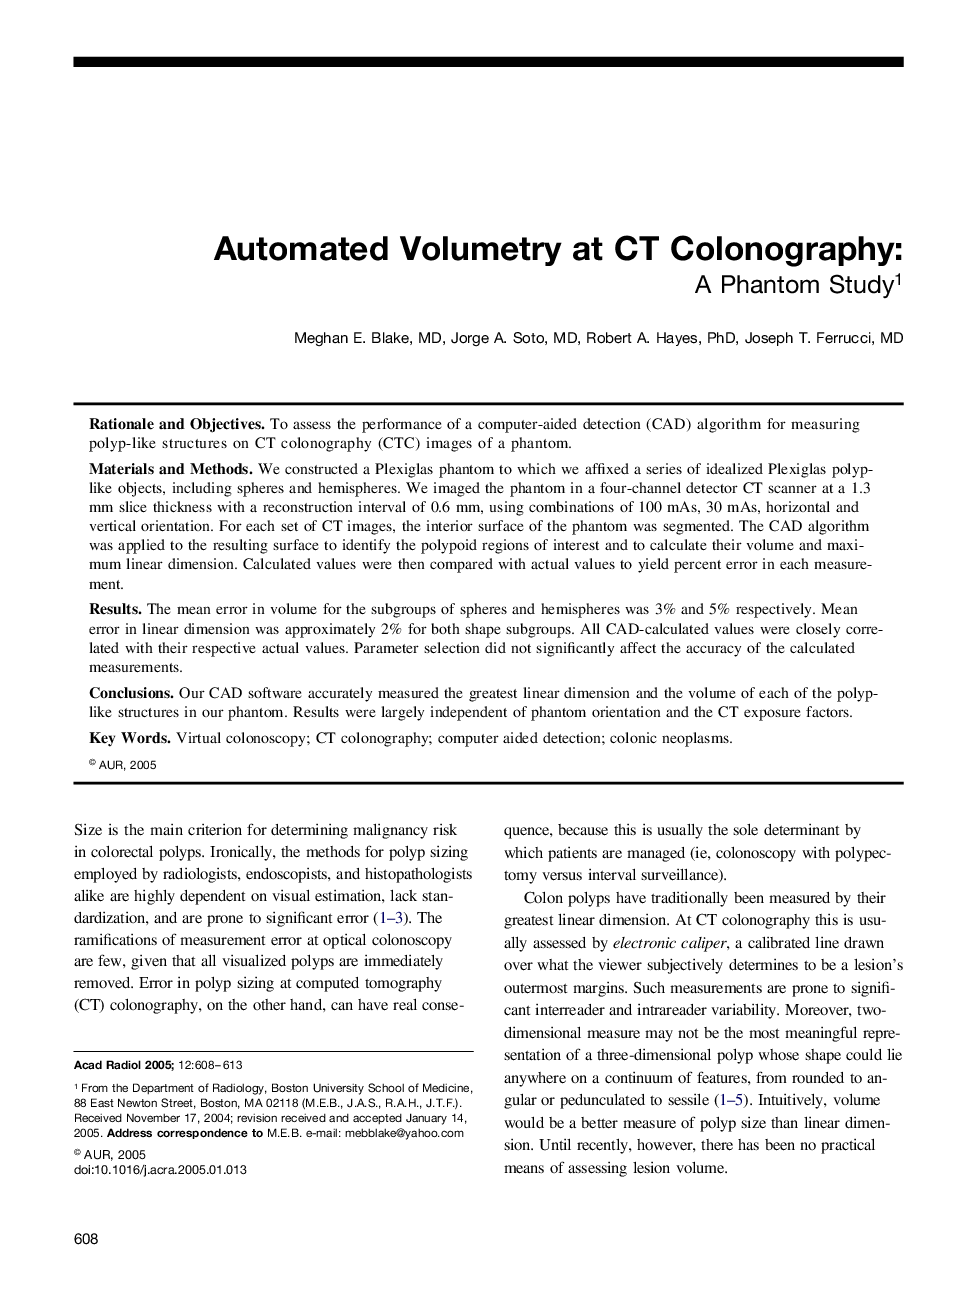 Automated Volumetry at CT Colonography